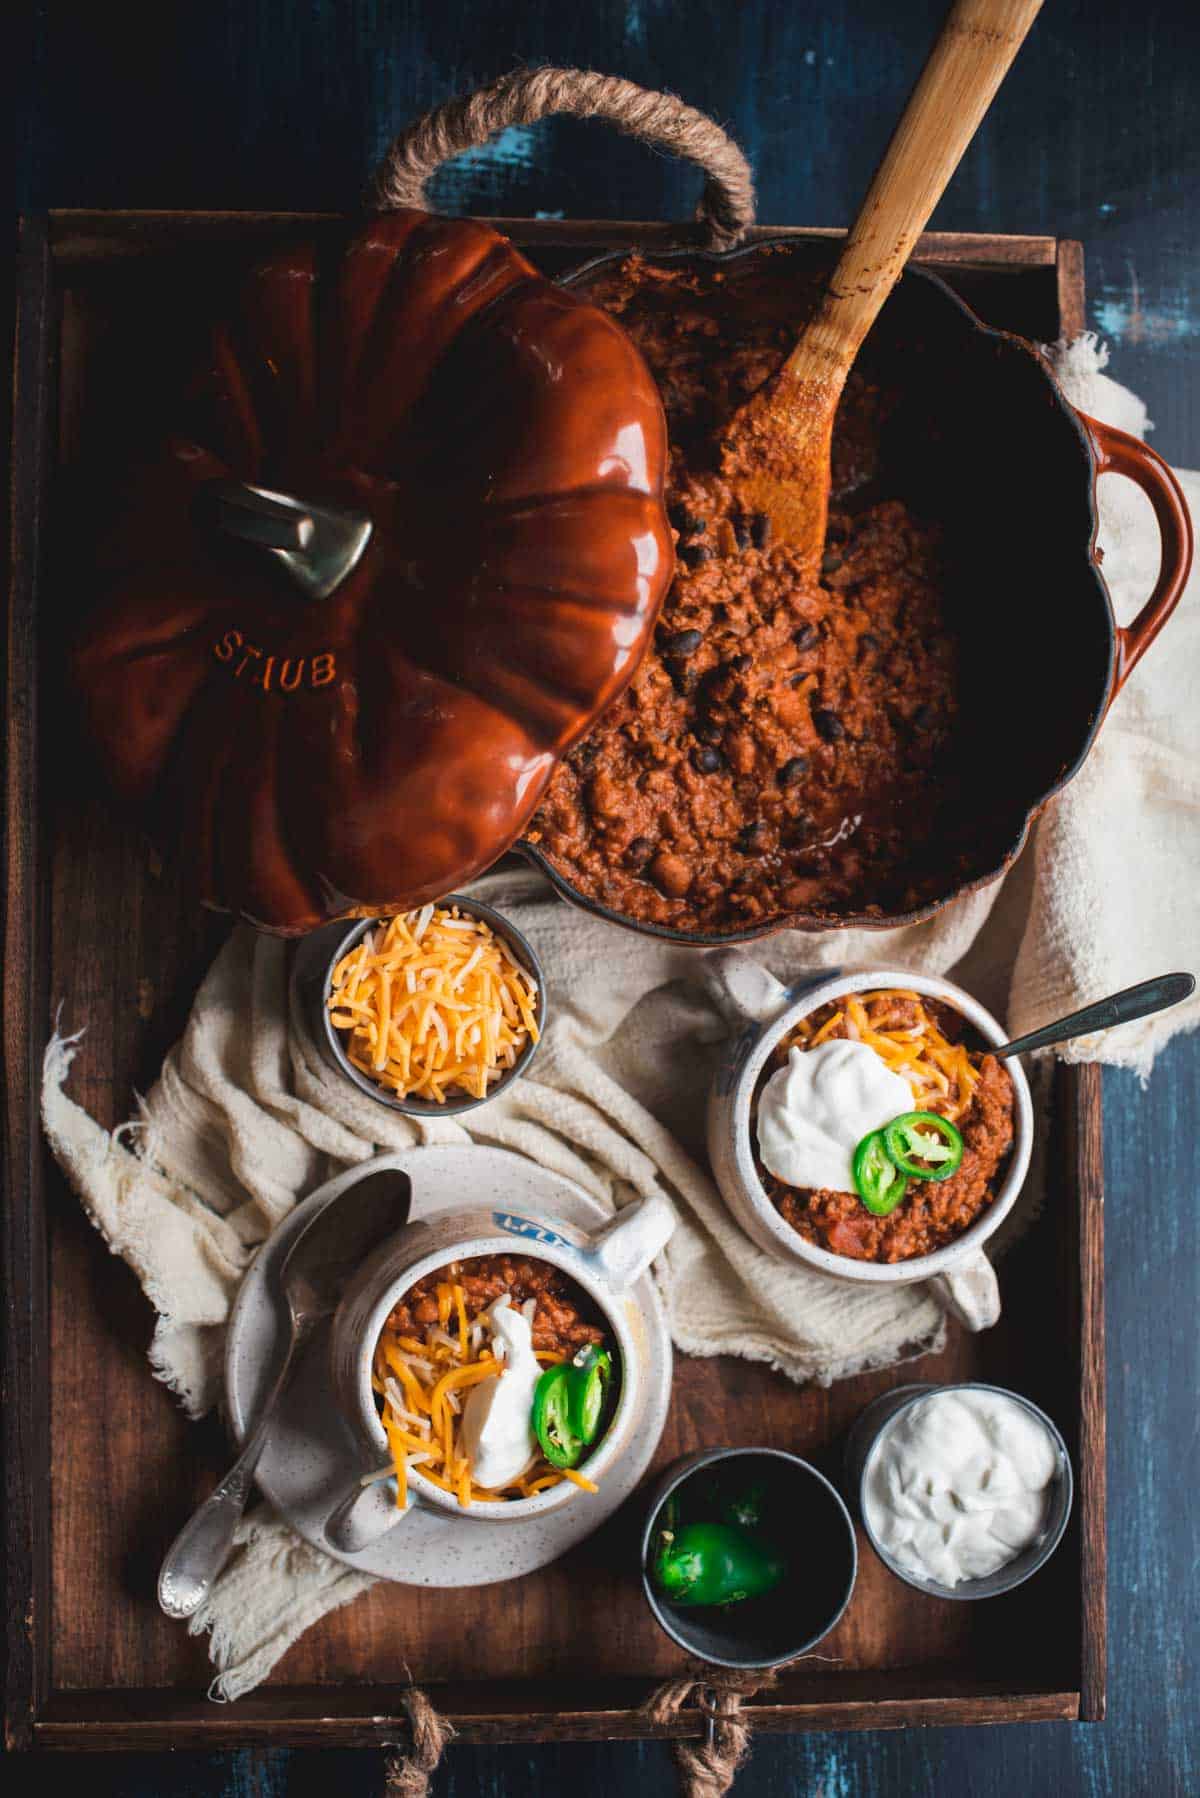 A saucepan in the shape and color of a pumpkin sits on a wooden tray and is filled with Pumpkin chili, the lid is leaning on the edge of the pan. There is a small bowl of grated cheese on the board, alongside 2 white bowls of Pumpkin Beef Chili. There is extra jalapenos and sour cream in ramekin dishes to the side.